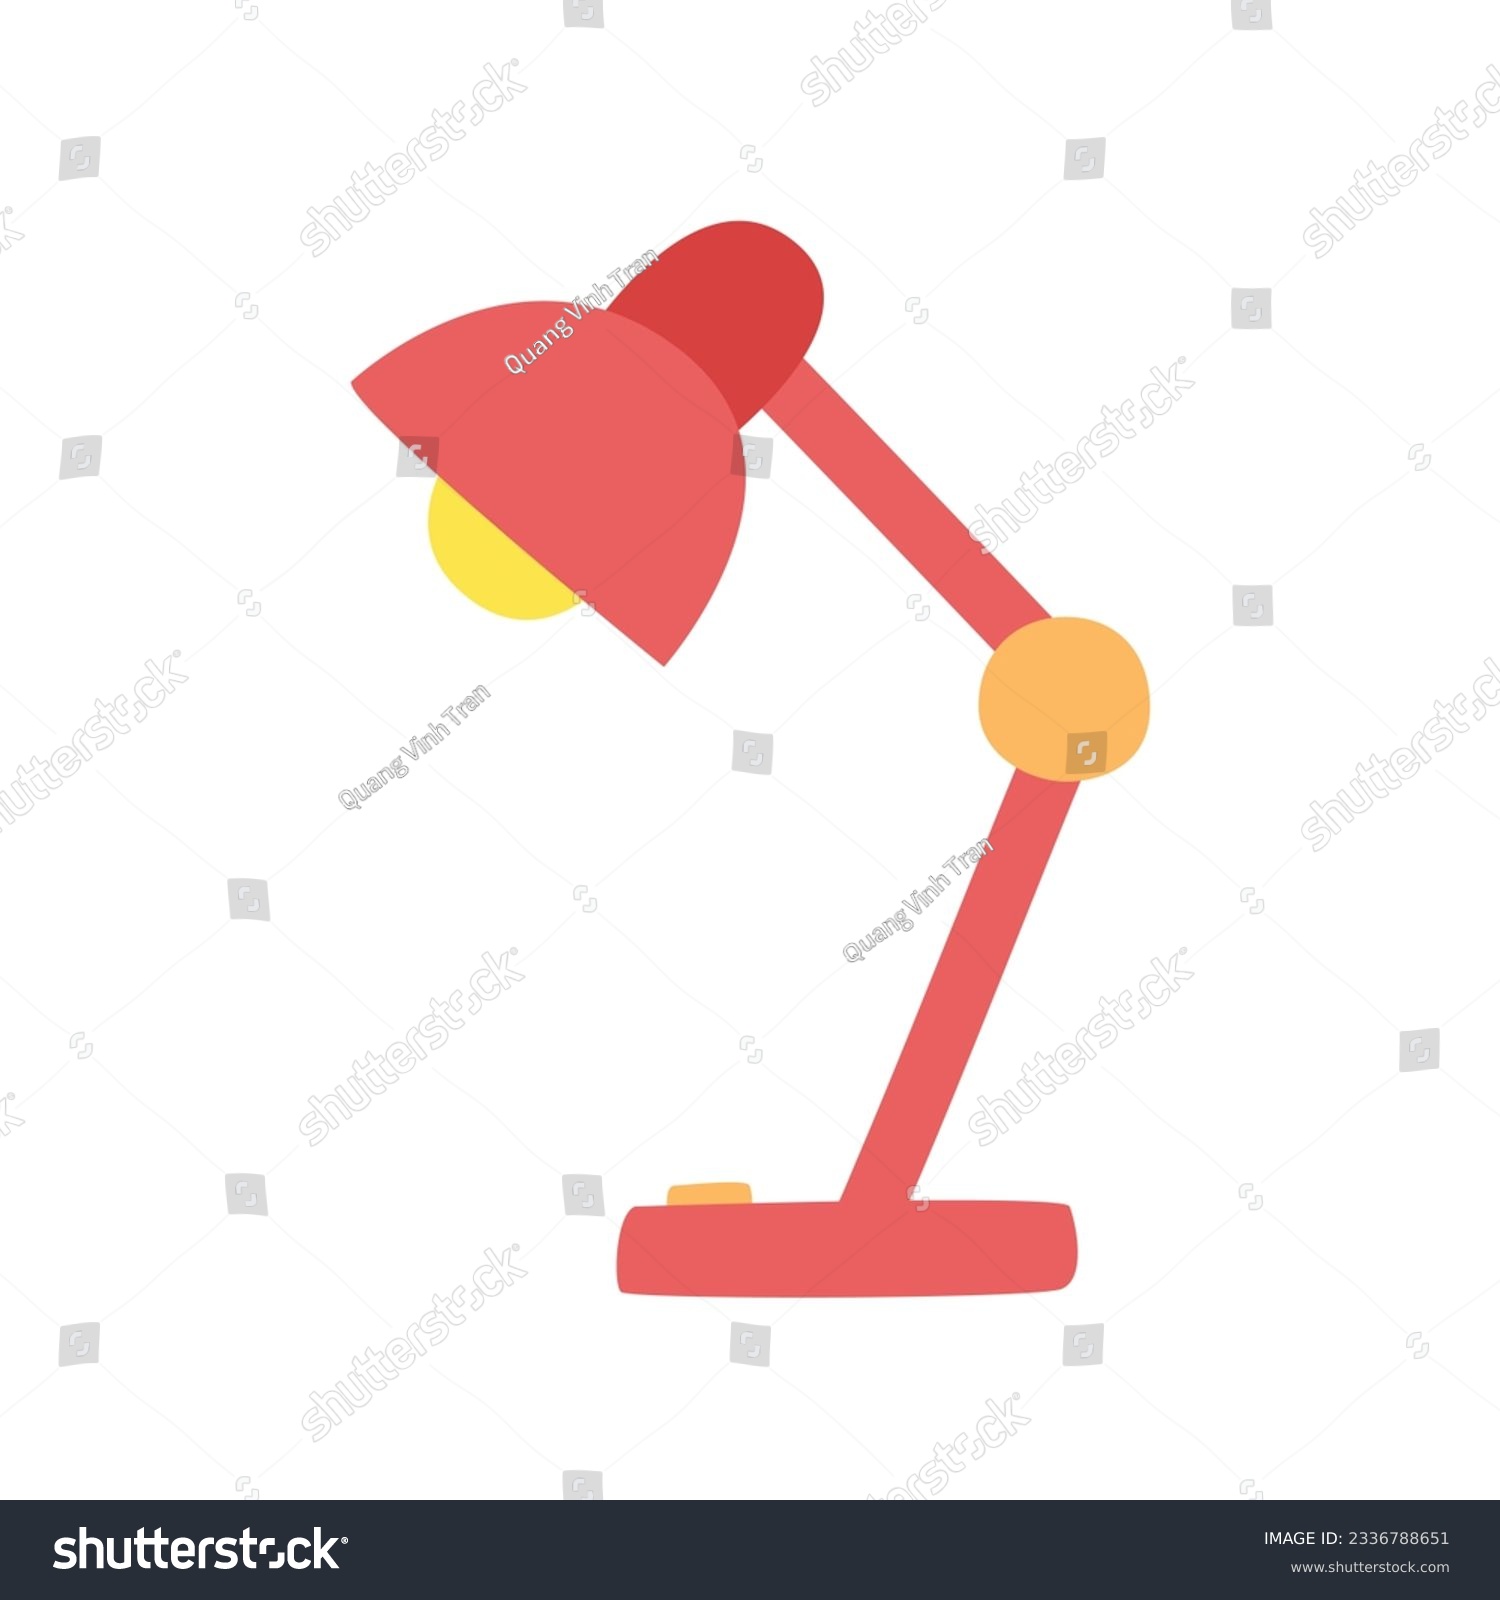 Desk lamp clipart. Simple red student desk lamp flat vector illustration clipart cartoon style, hand drawn doodle. Students, classroom, school supplies, back to school concept #2336788651